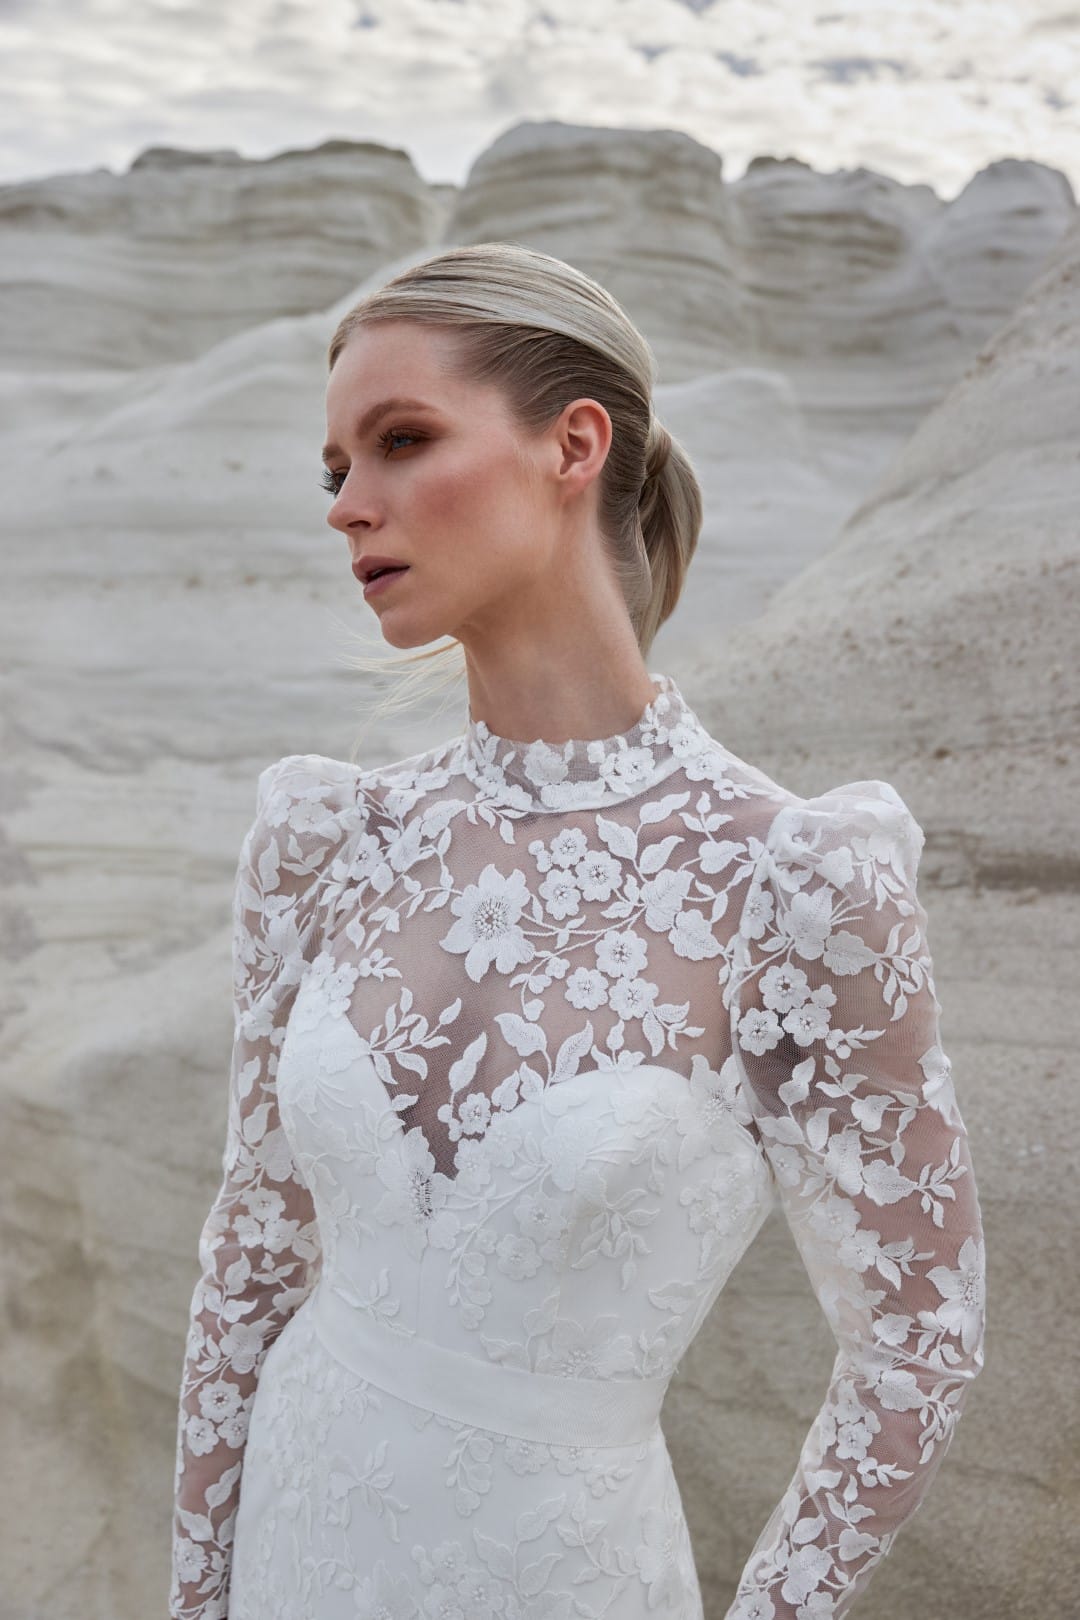 Sassi Holford Taylor is what dress dreams are made of with its figure-hugging silhouette that flares out into a fishtail. Book your wedding dress appointment at Your Dream Bridal Boston.